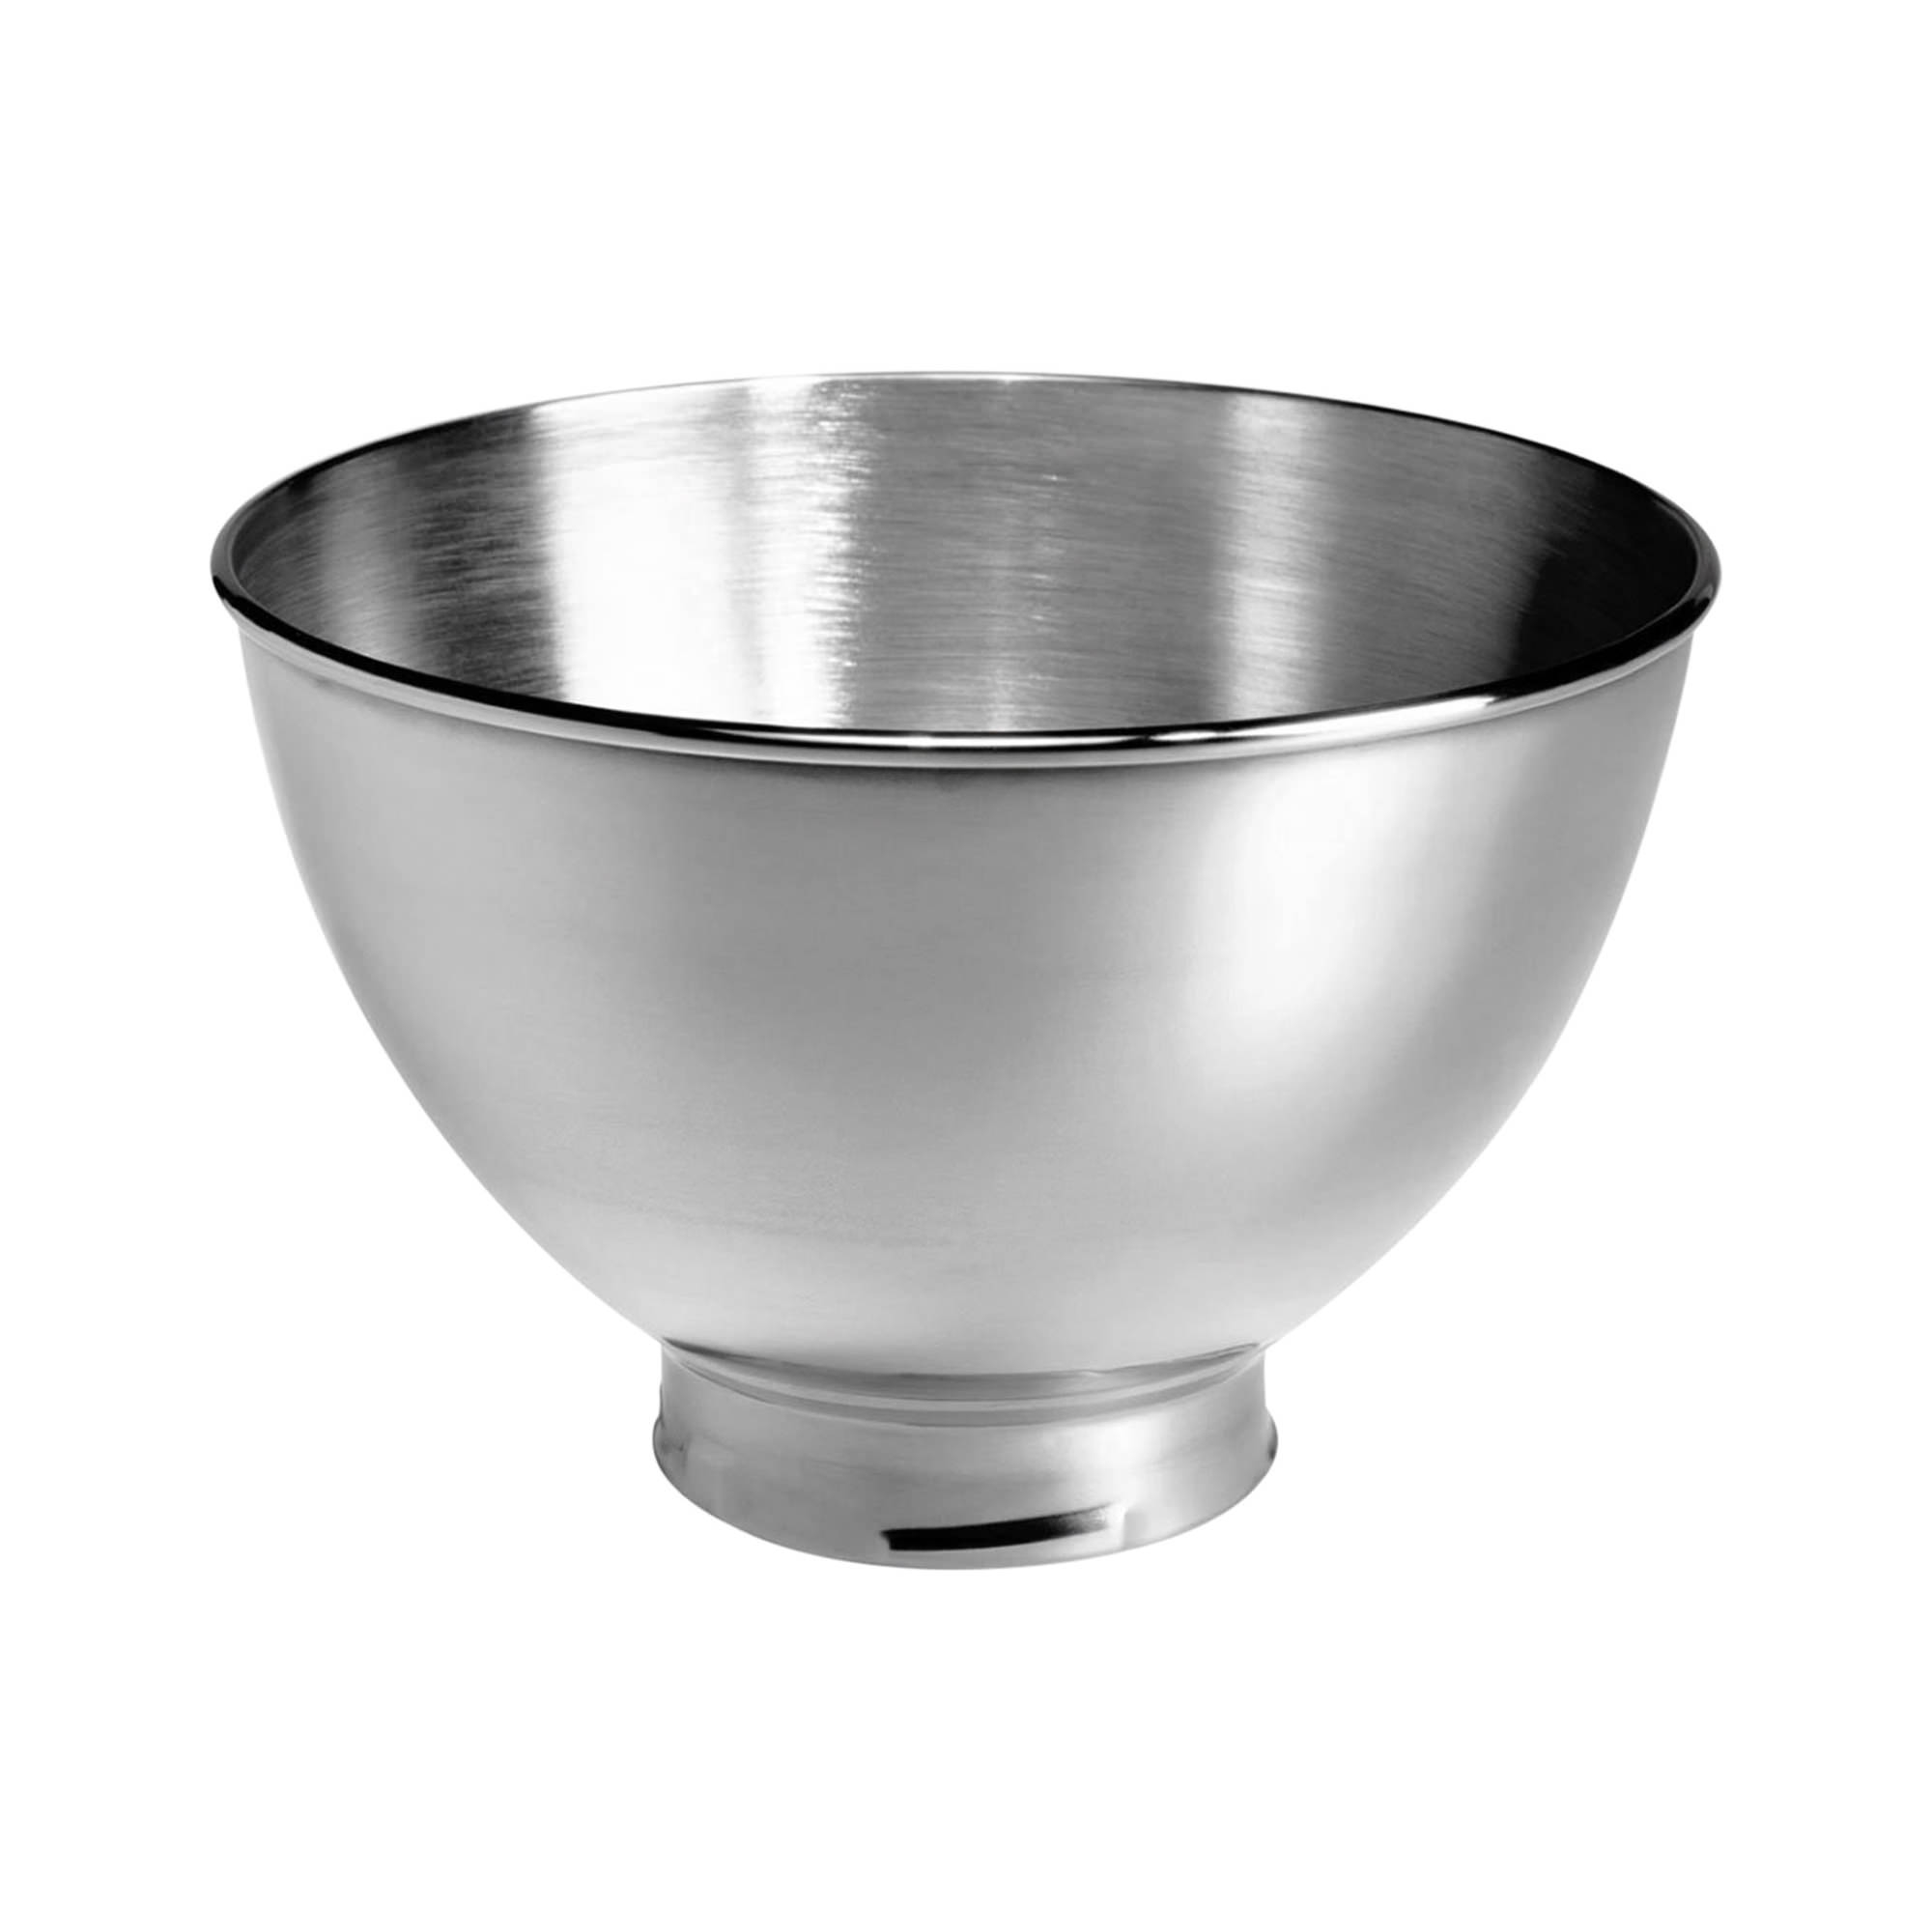 KitchenAid Stainless Steel Mixing Bowl for Tilt-Head Stand Mixer 2.8L Image 1